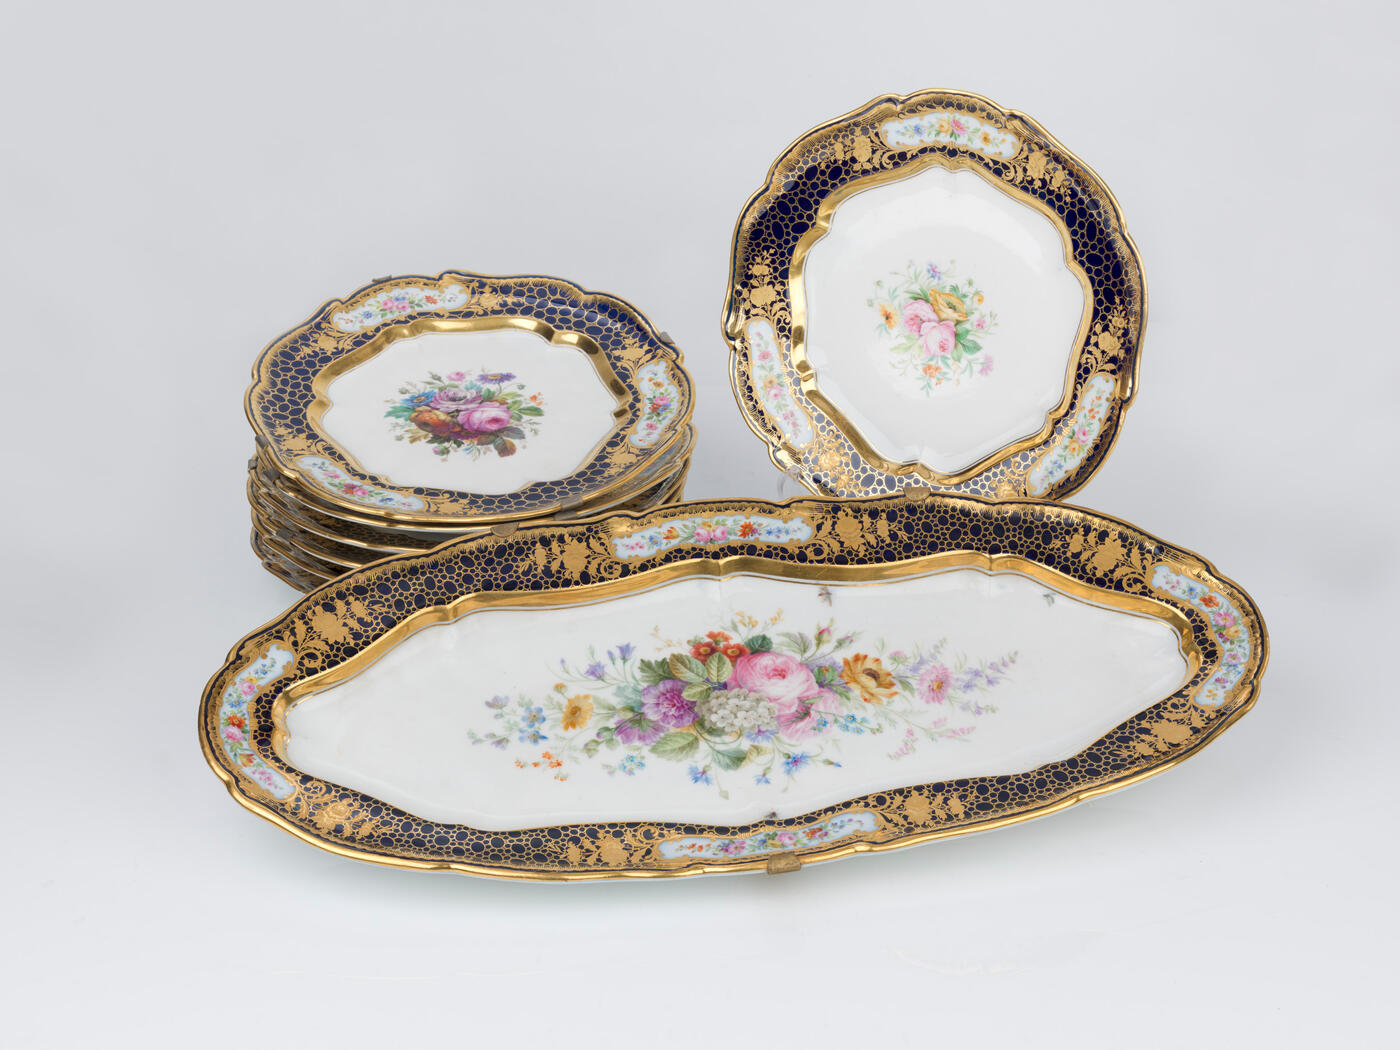 A Set of Seven Dinner Plates and a Fish Dish from the Sèvres Service